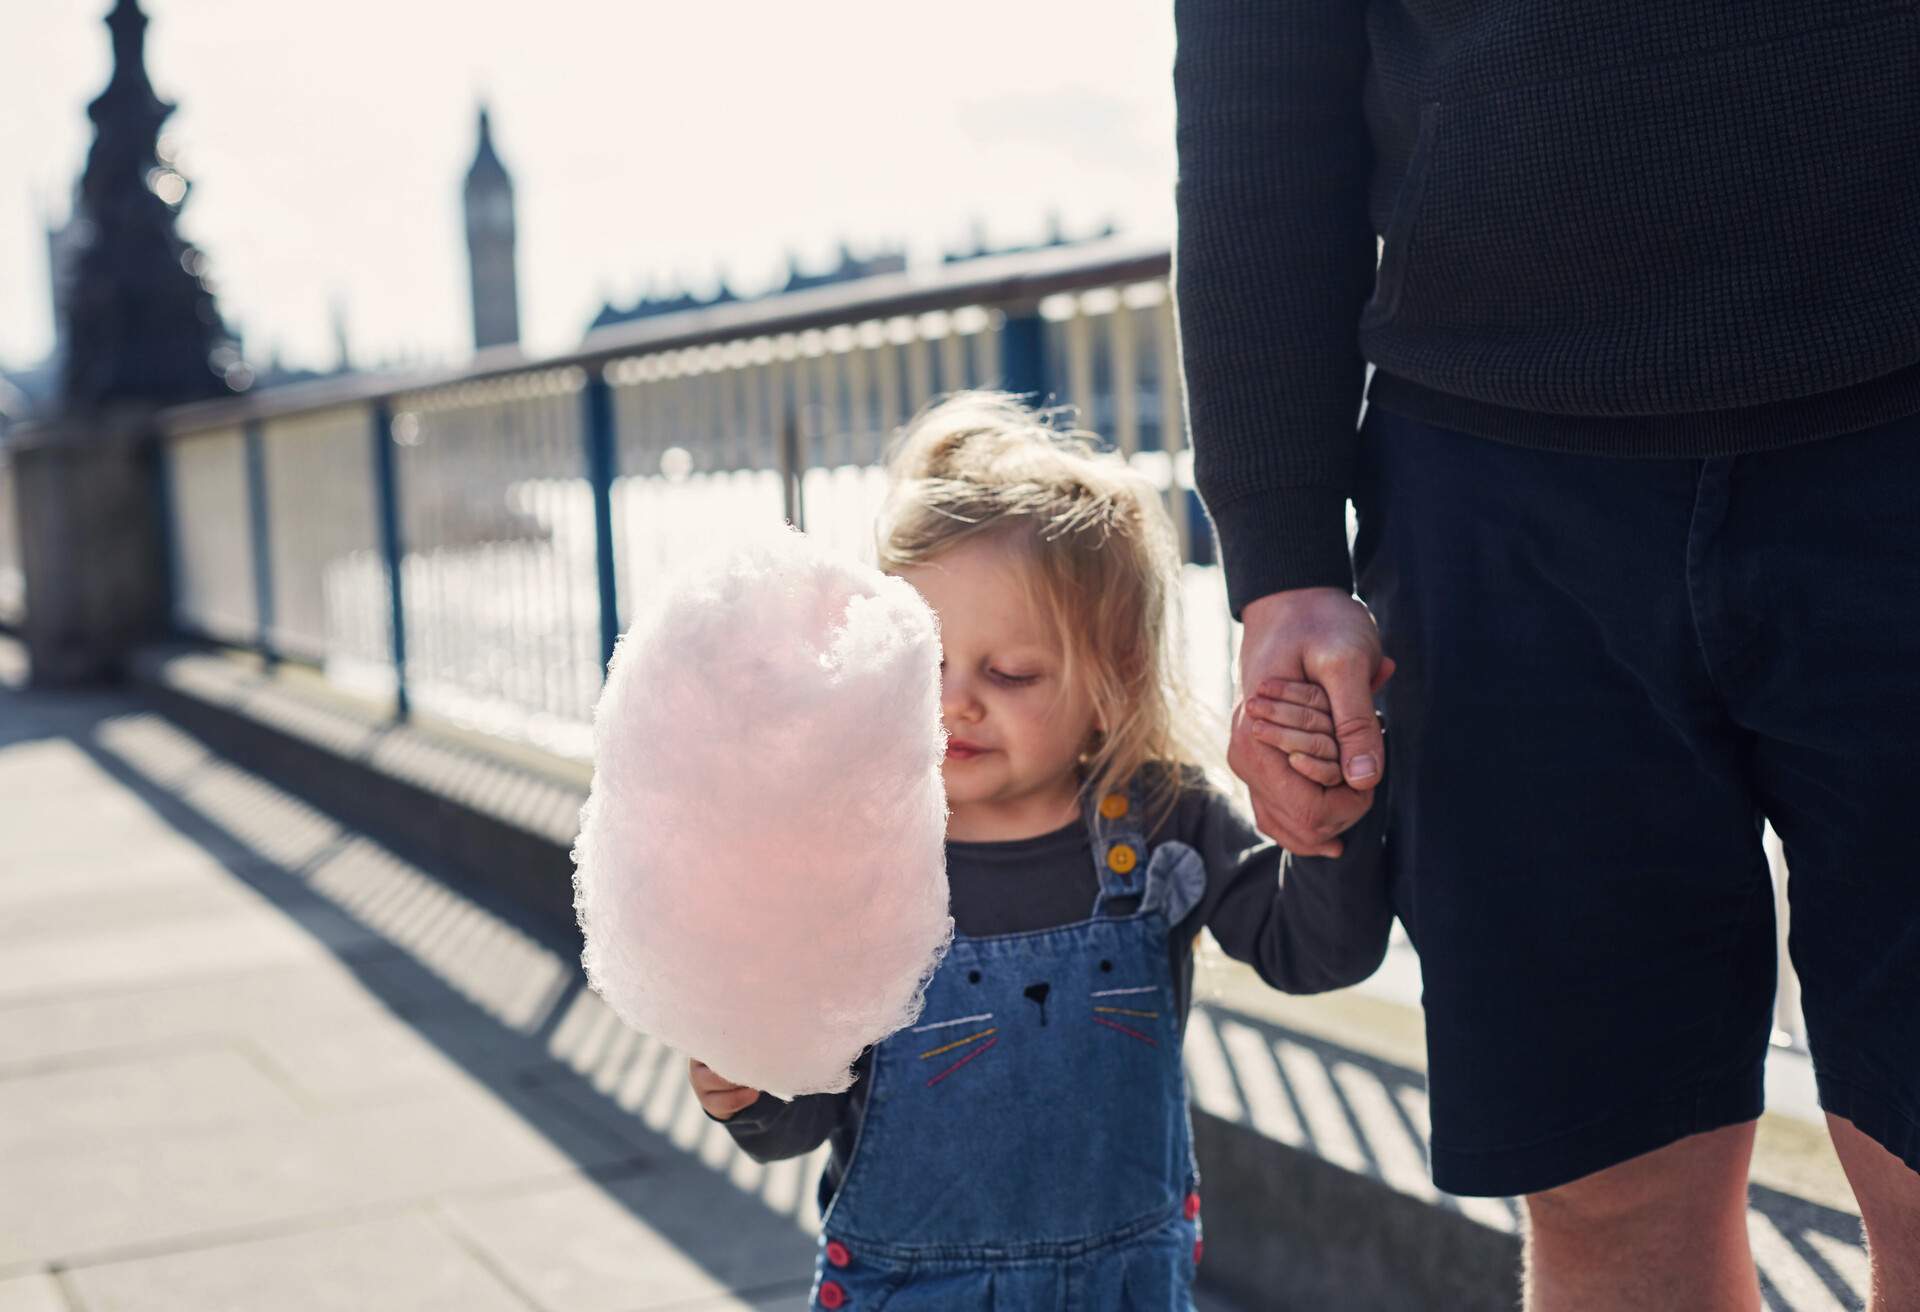 Little toddler girl eating Candy floss by the River Thames